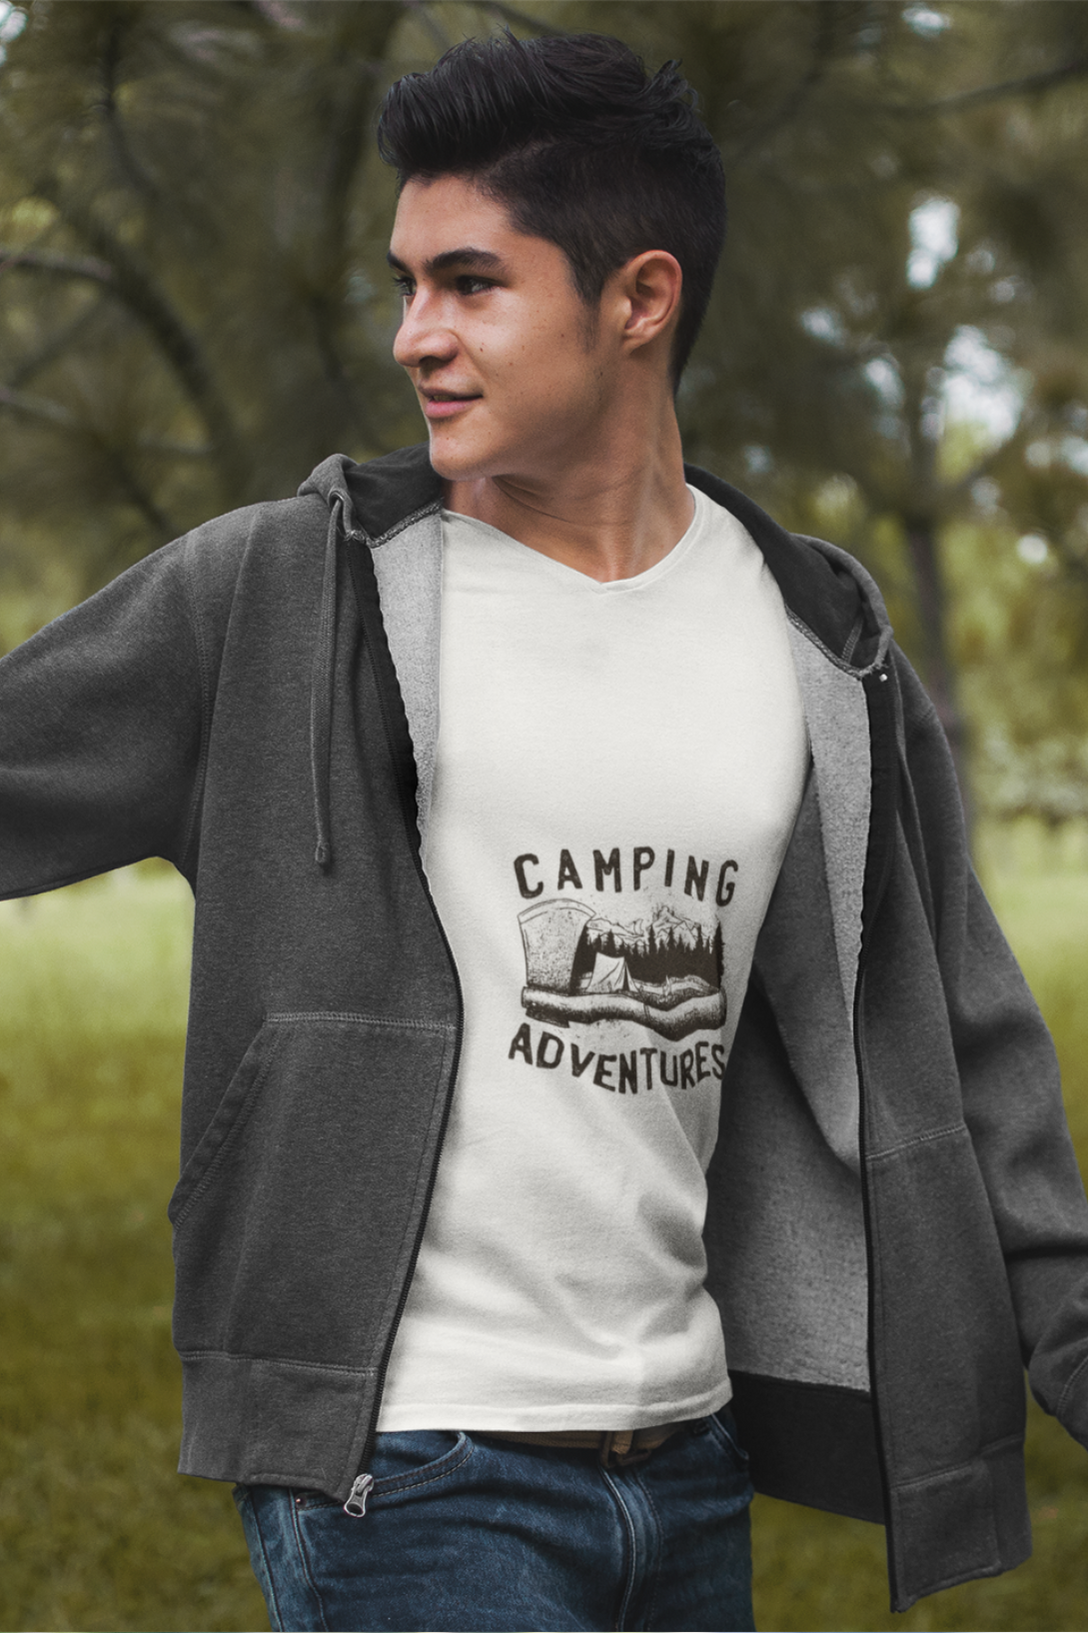 Camping Adventures Printed T-Shirt For Men - WowWaves - 2